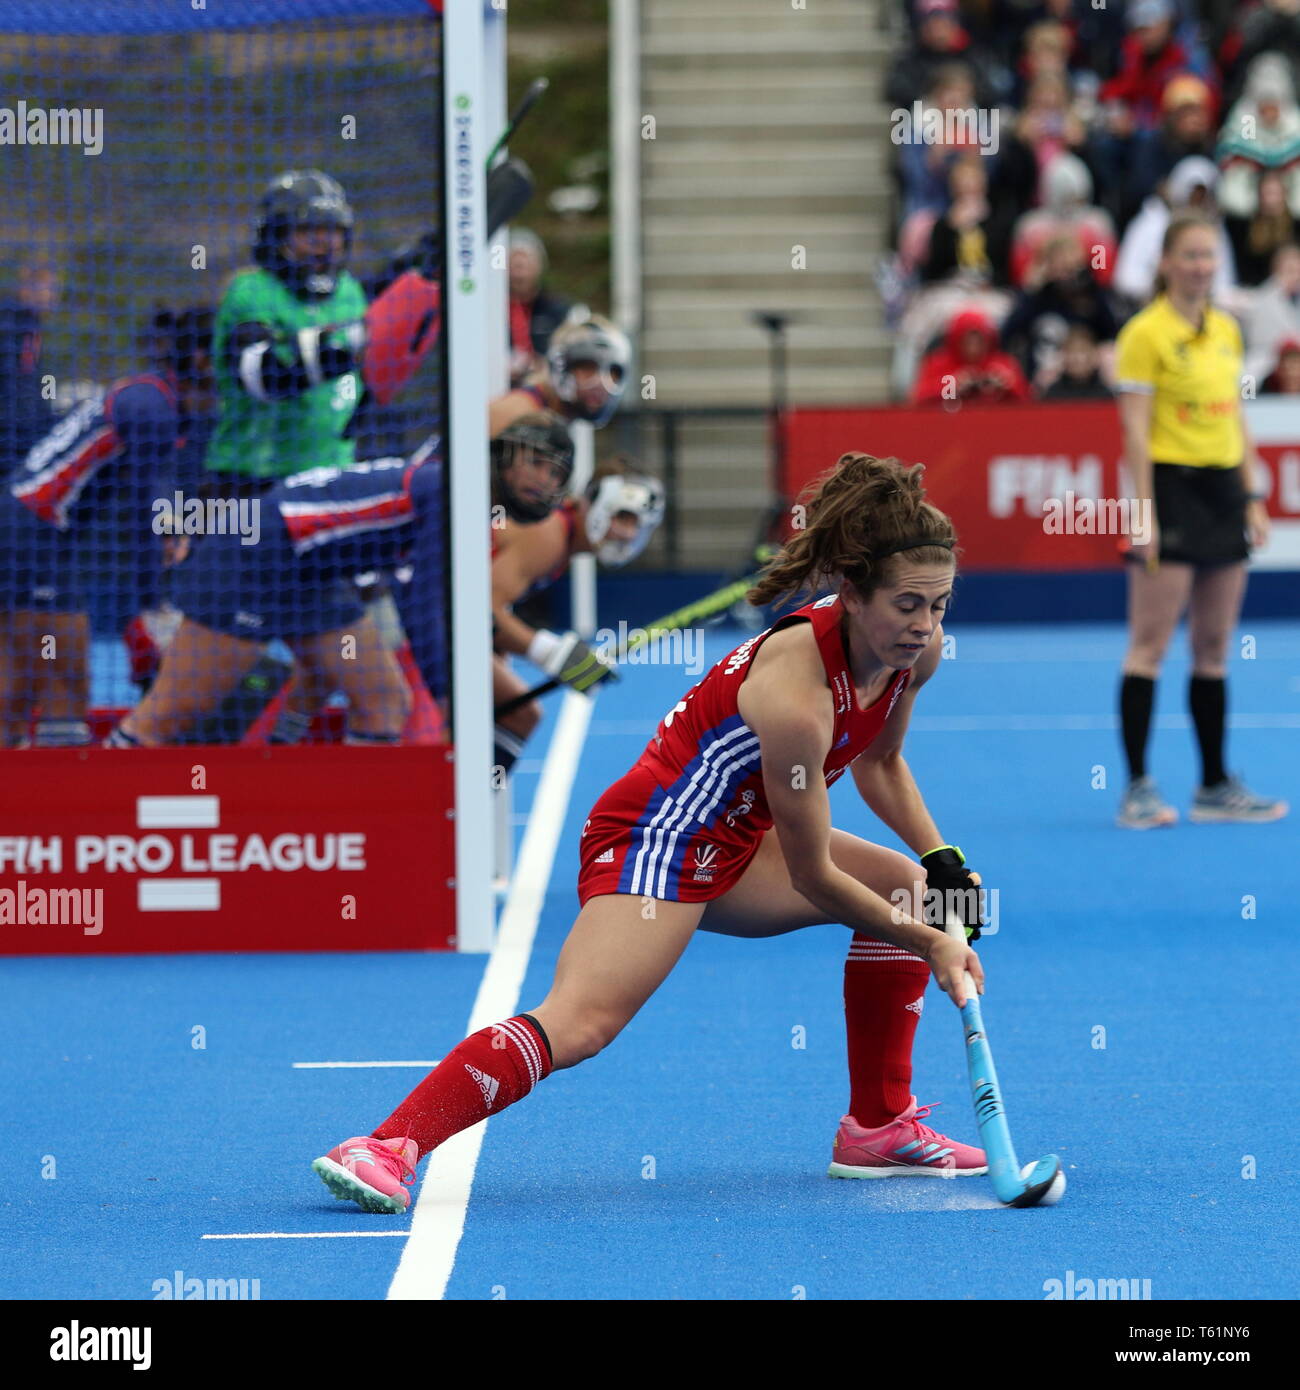 Anna Toman GBR taking the penalty in the 2019 FIH Pro League Great Britain v United States women’s hockey match at Queens Elizabeth Olympic Park, Stock Photo